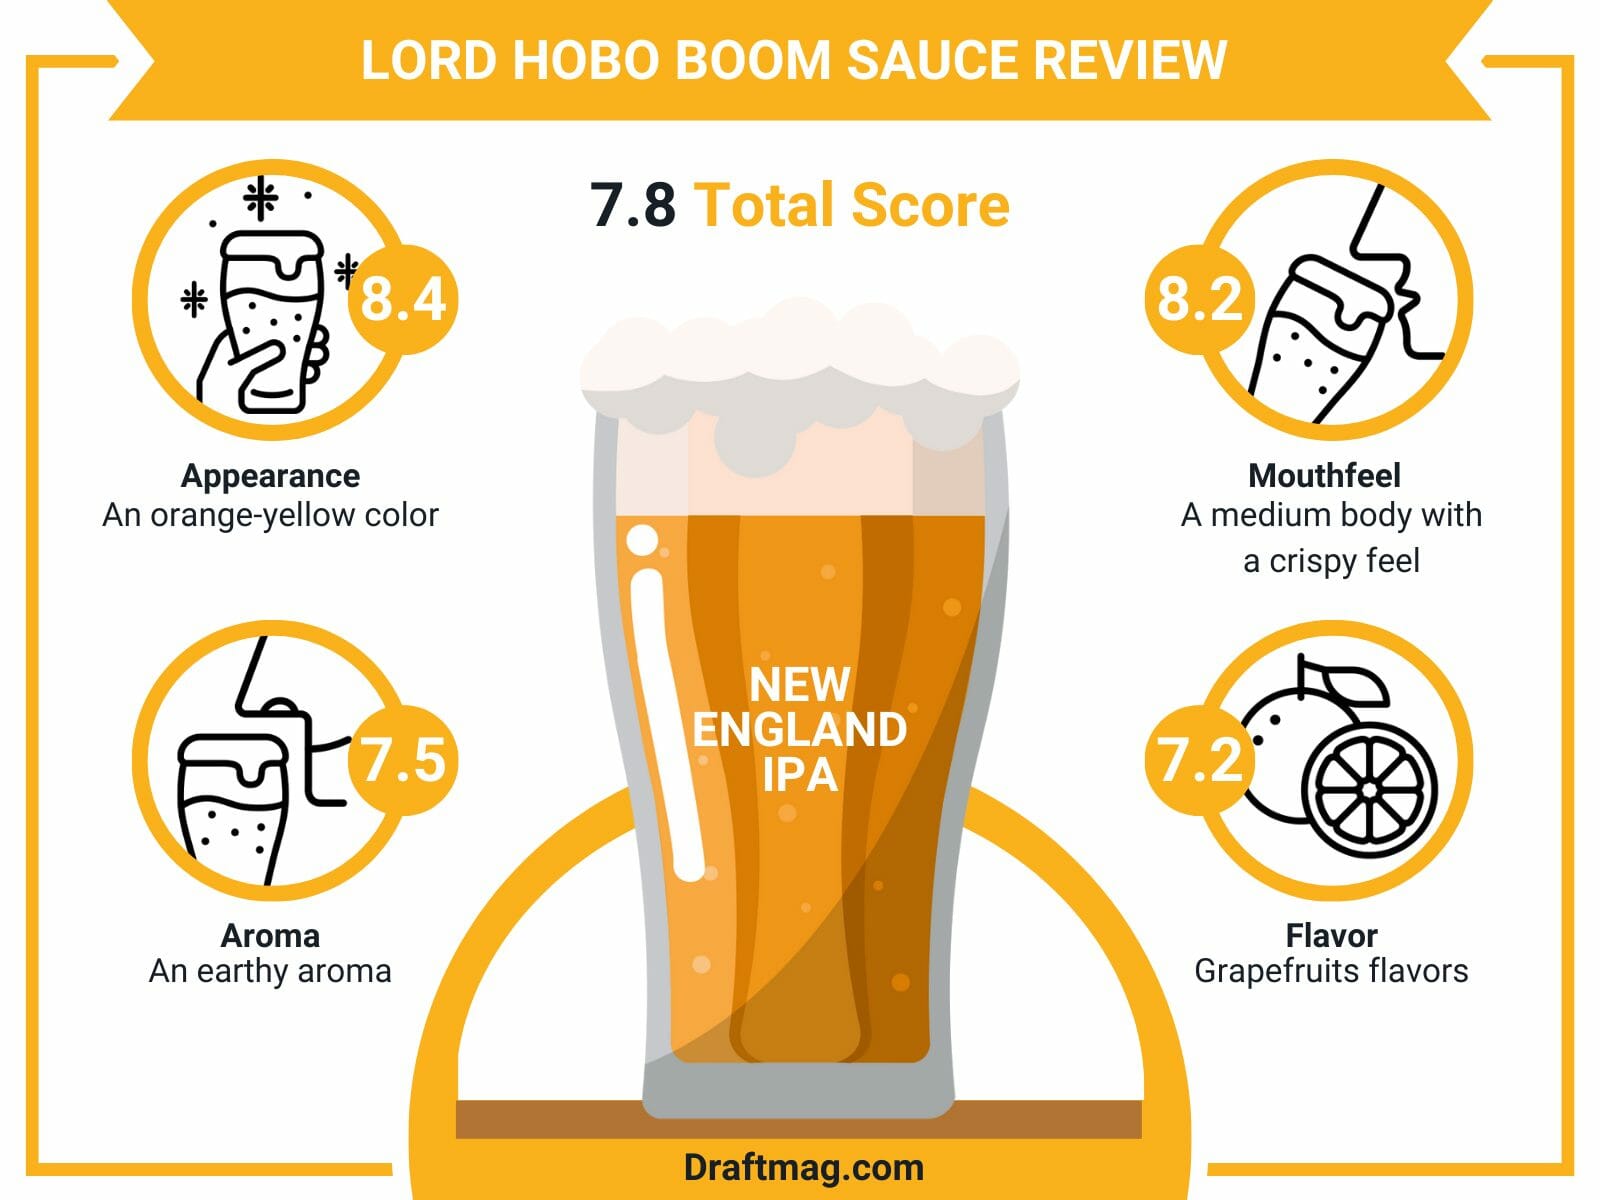 Lord hobo boom sauce review infographic